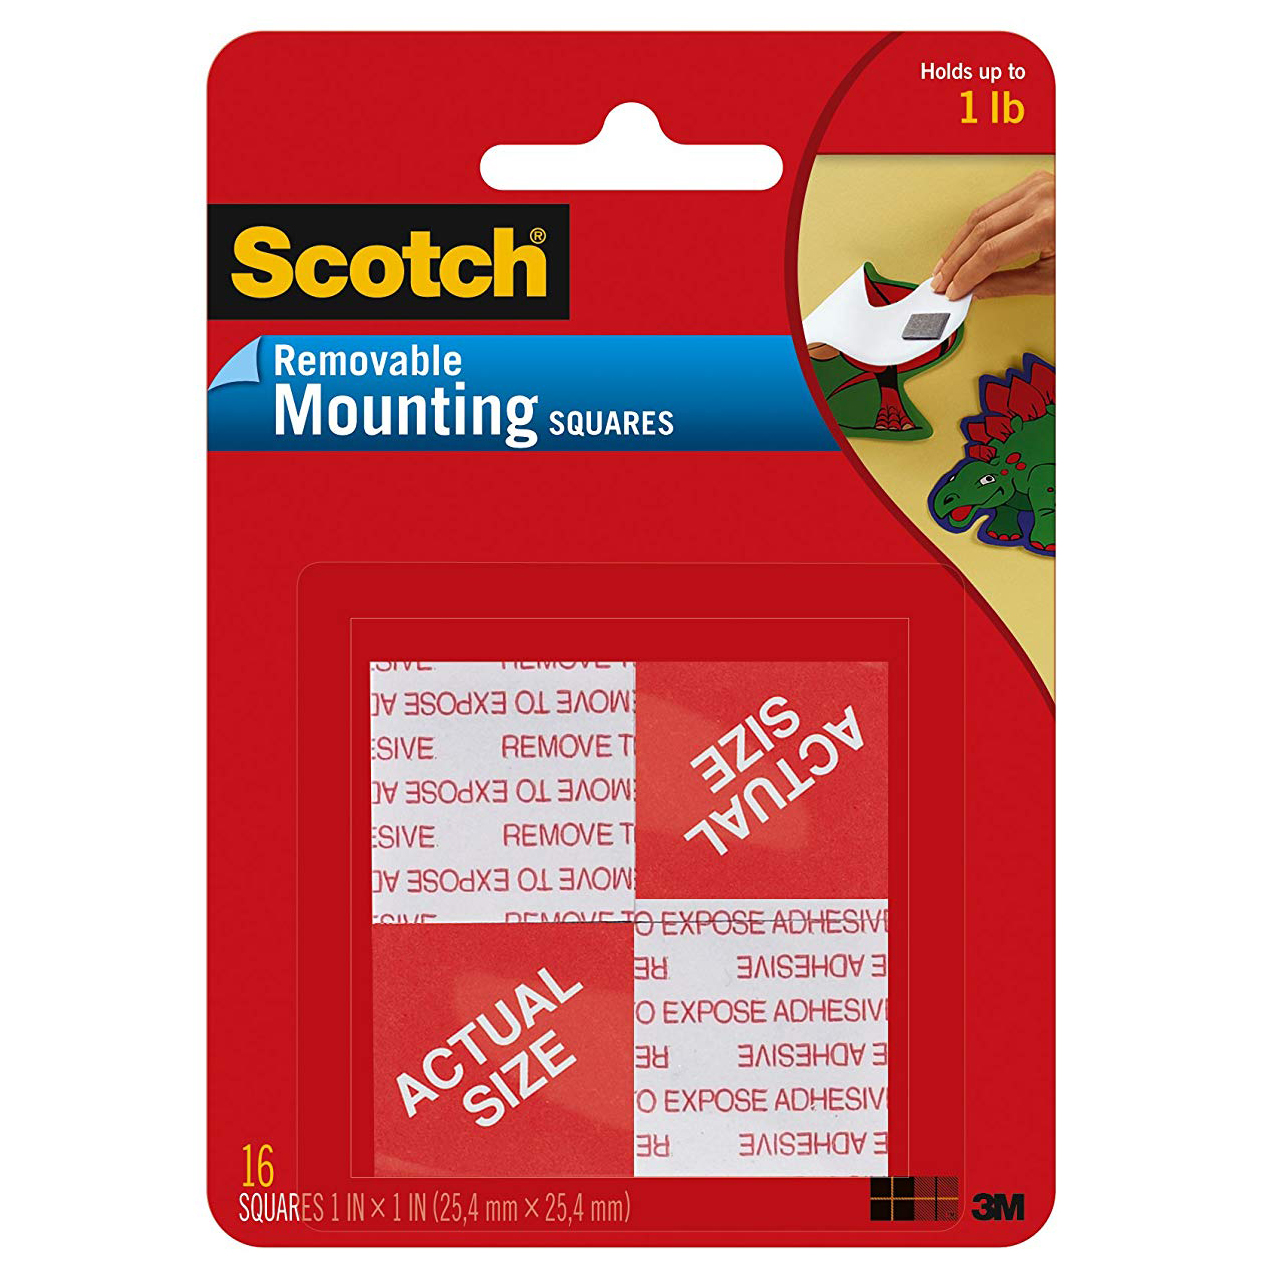 Scotch Foam Mounting Squares [Double-Sided Removable]